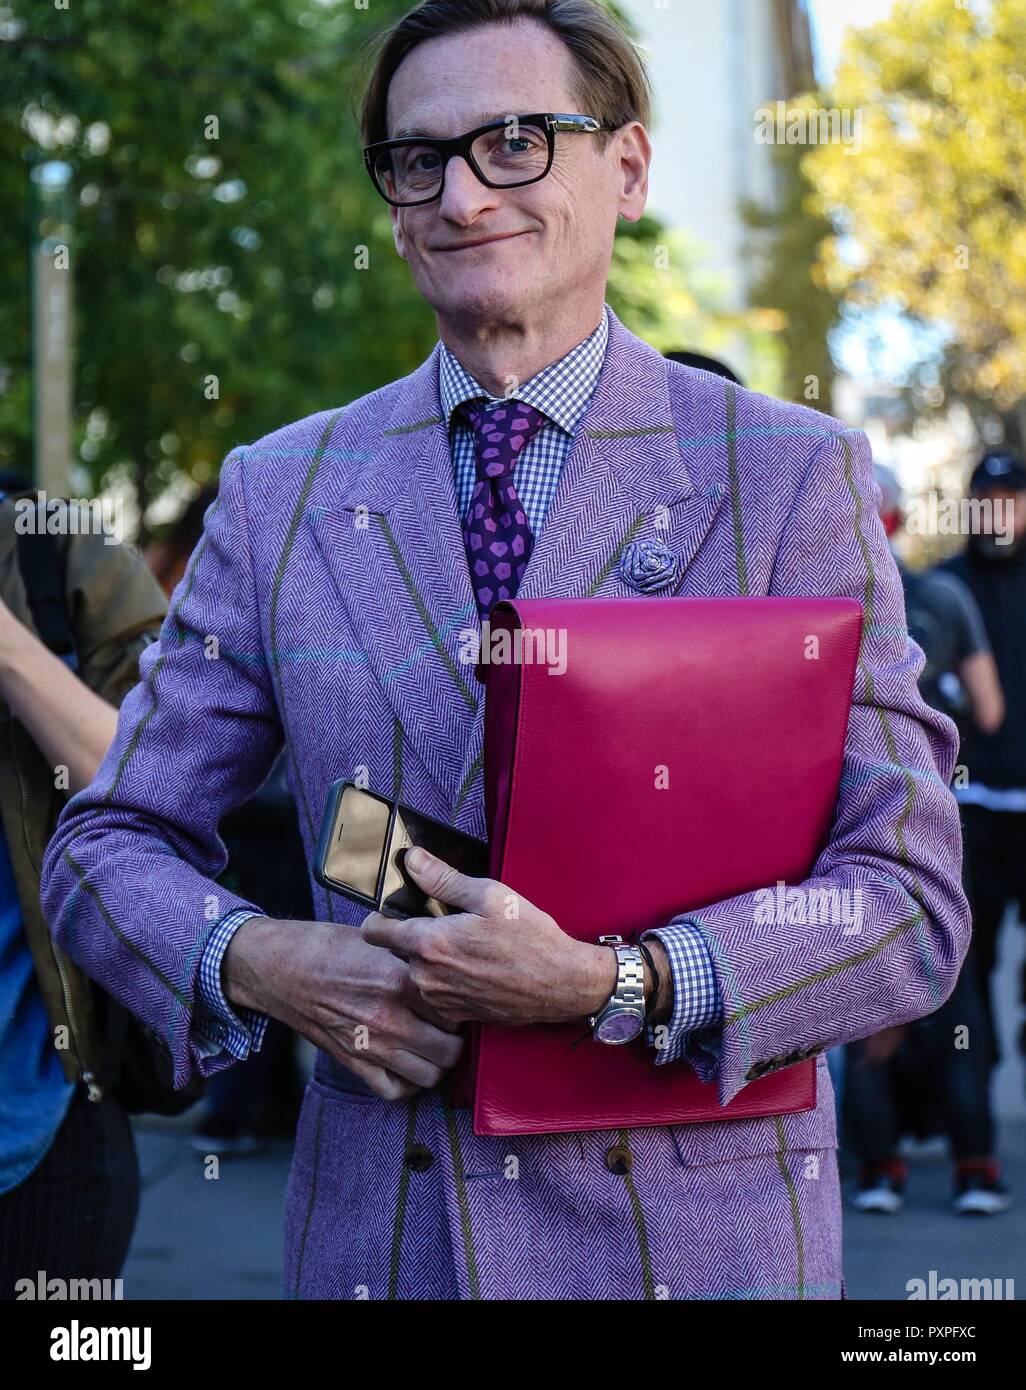 PARIS, France- September 26 2018: Hamish Bowles on the street during the  Paris Fashion Week Stock Photo - Alamy